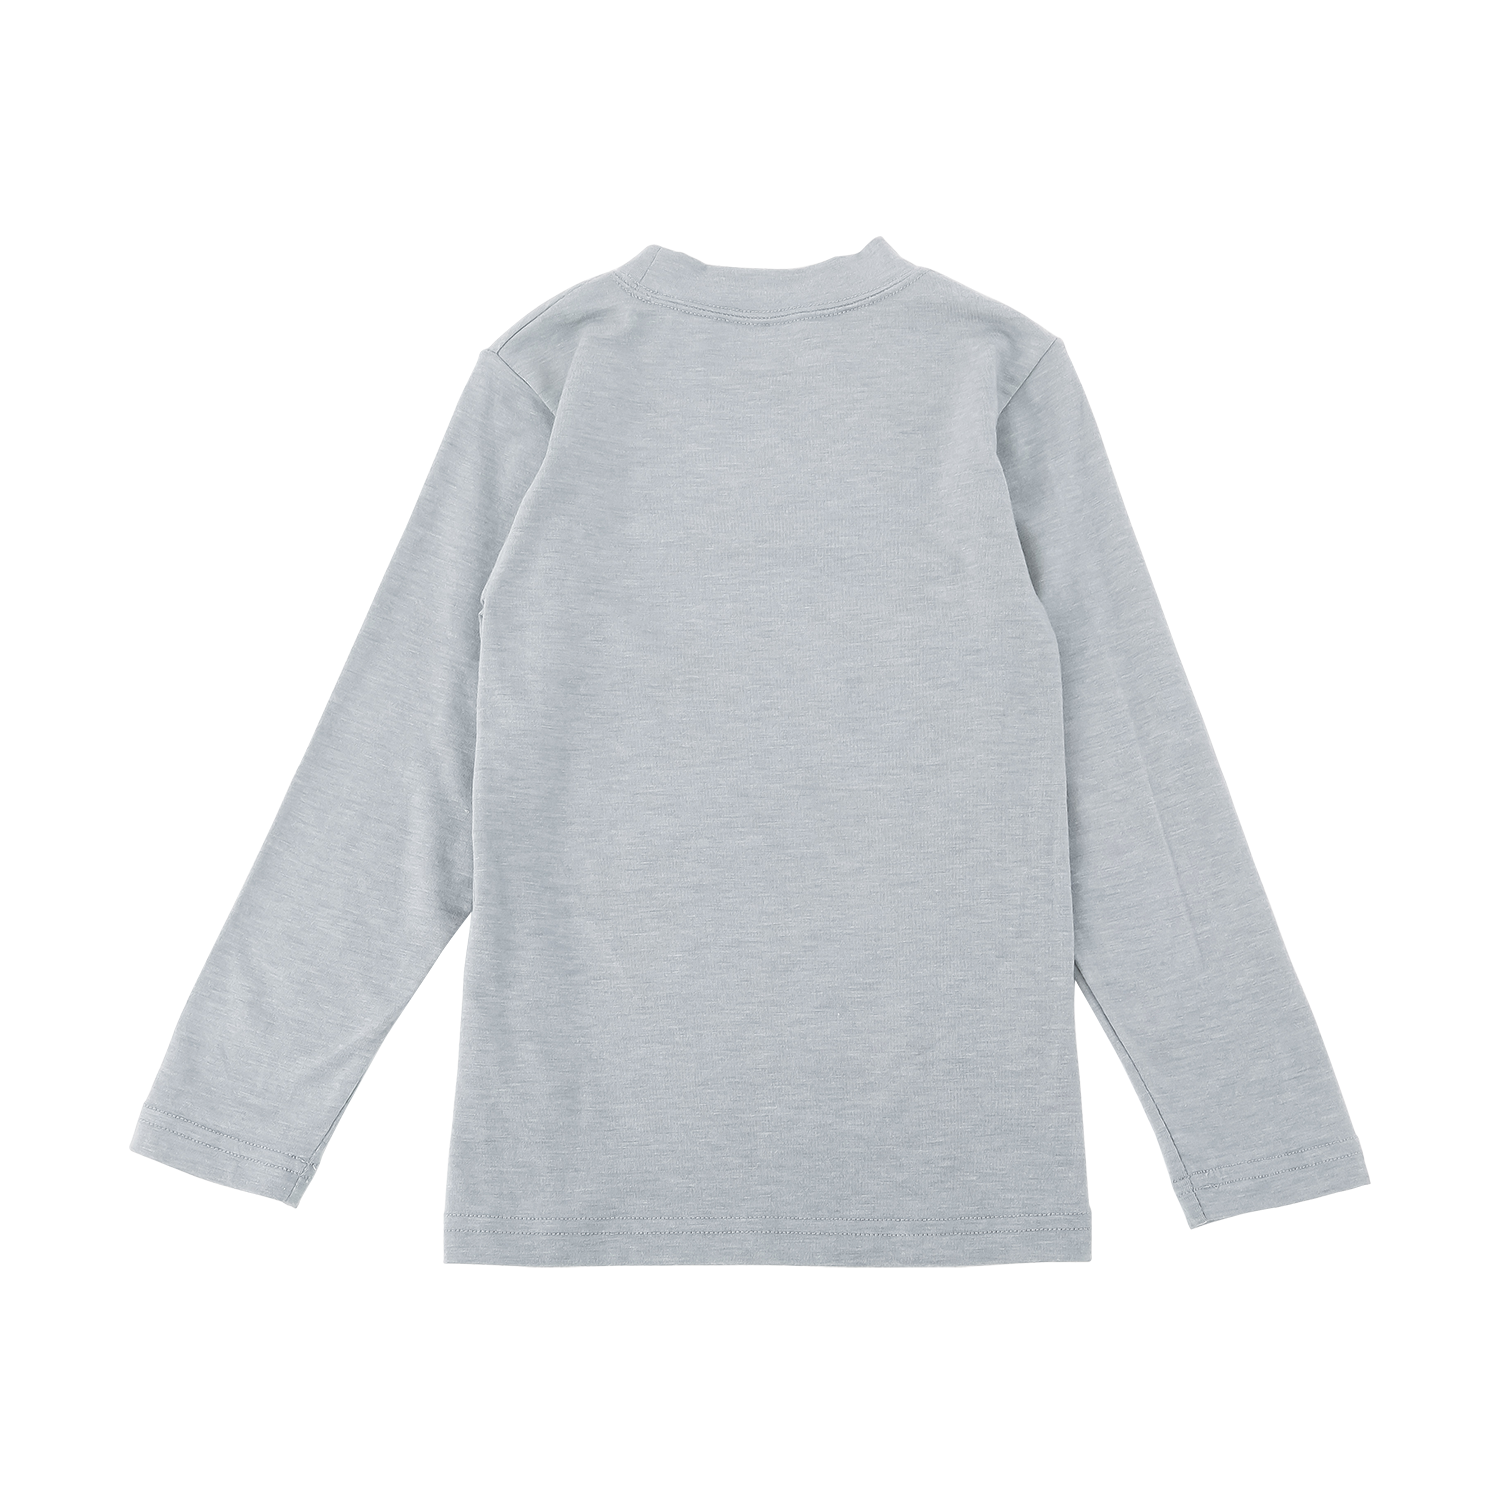 <tc>Heather grey kids Thermal T-Shirt with infinite blessings motif</tc>